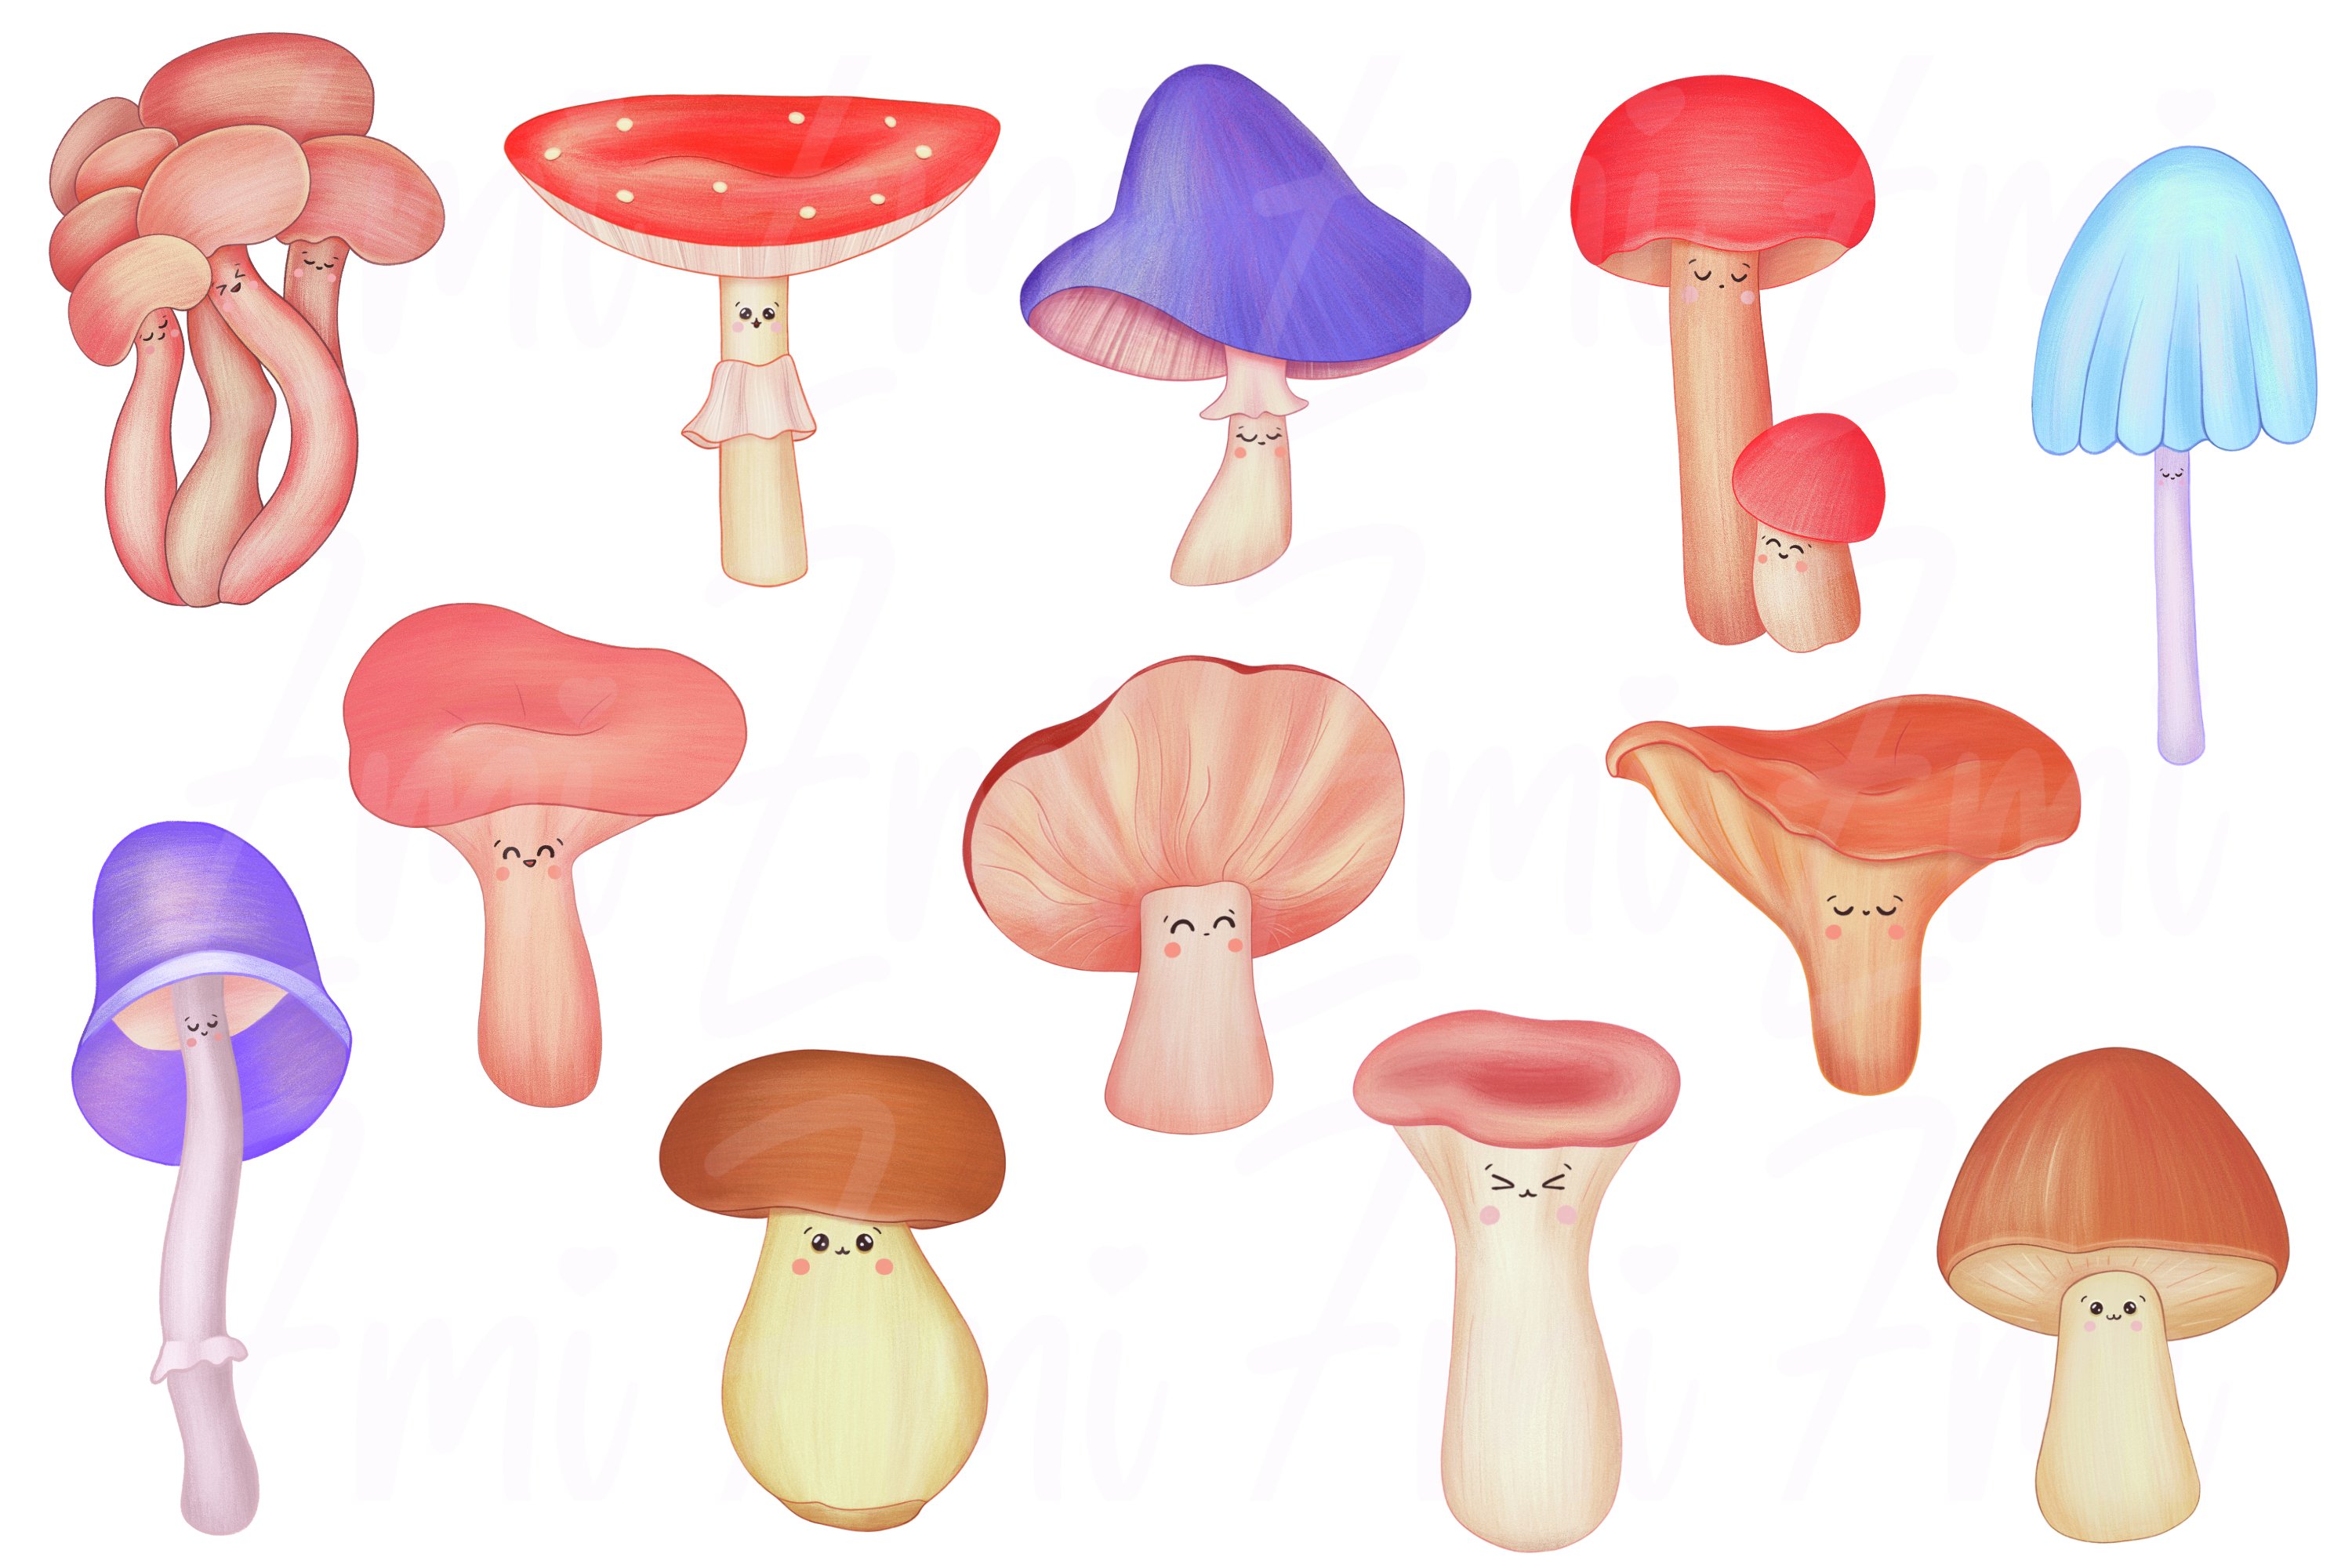 Kawaii bundle of different colorful mushrooms on a white background.